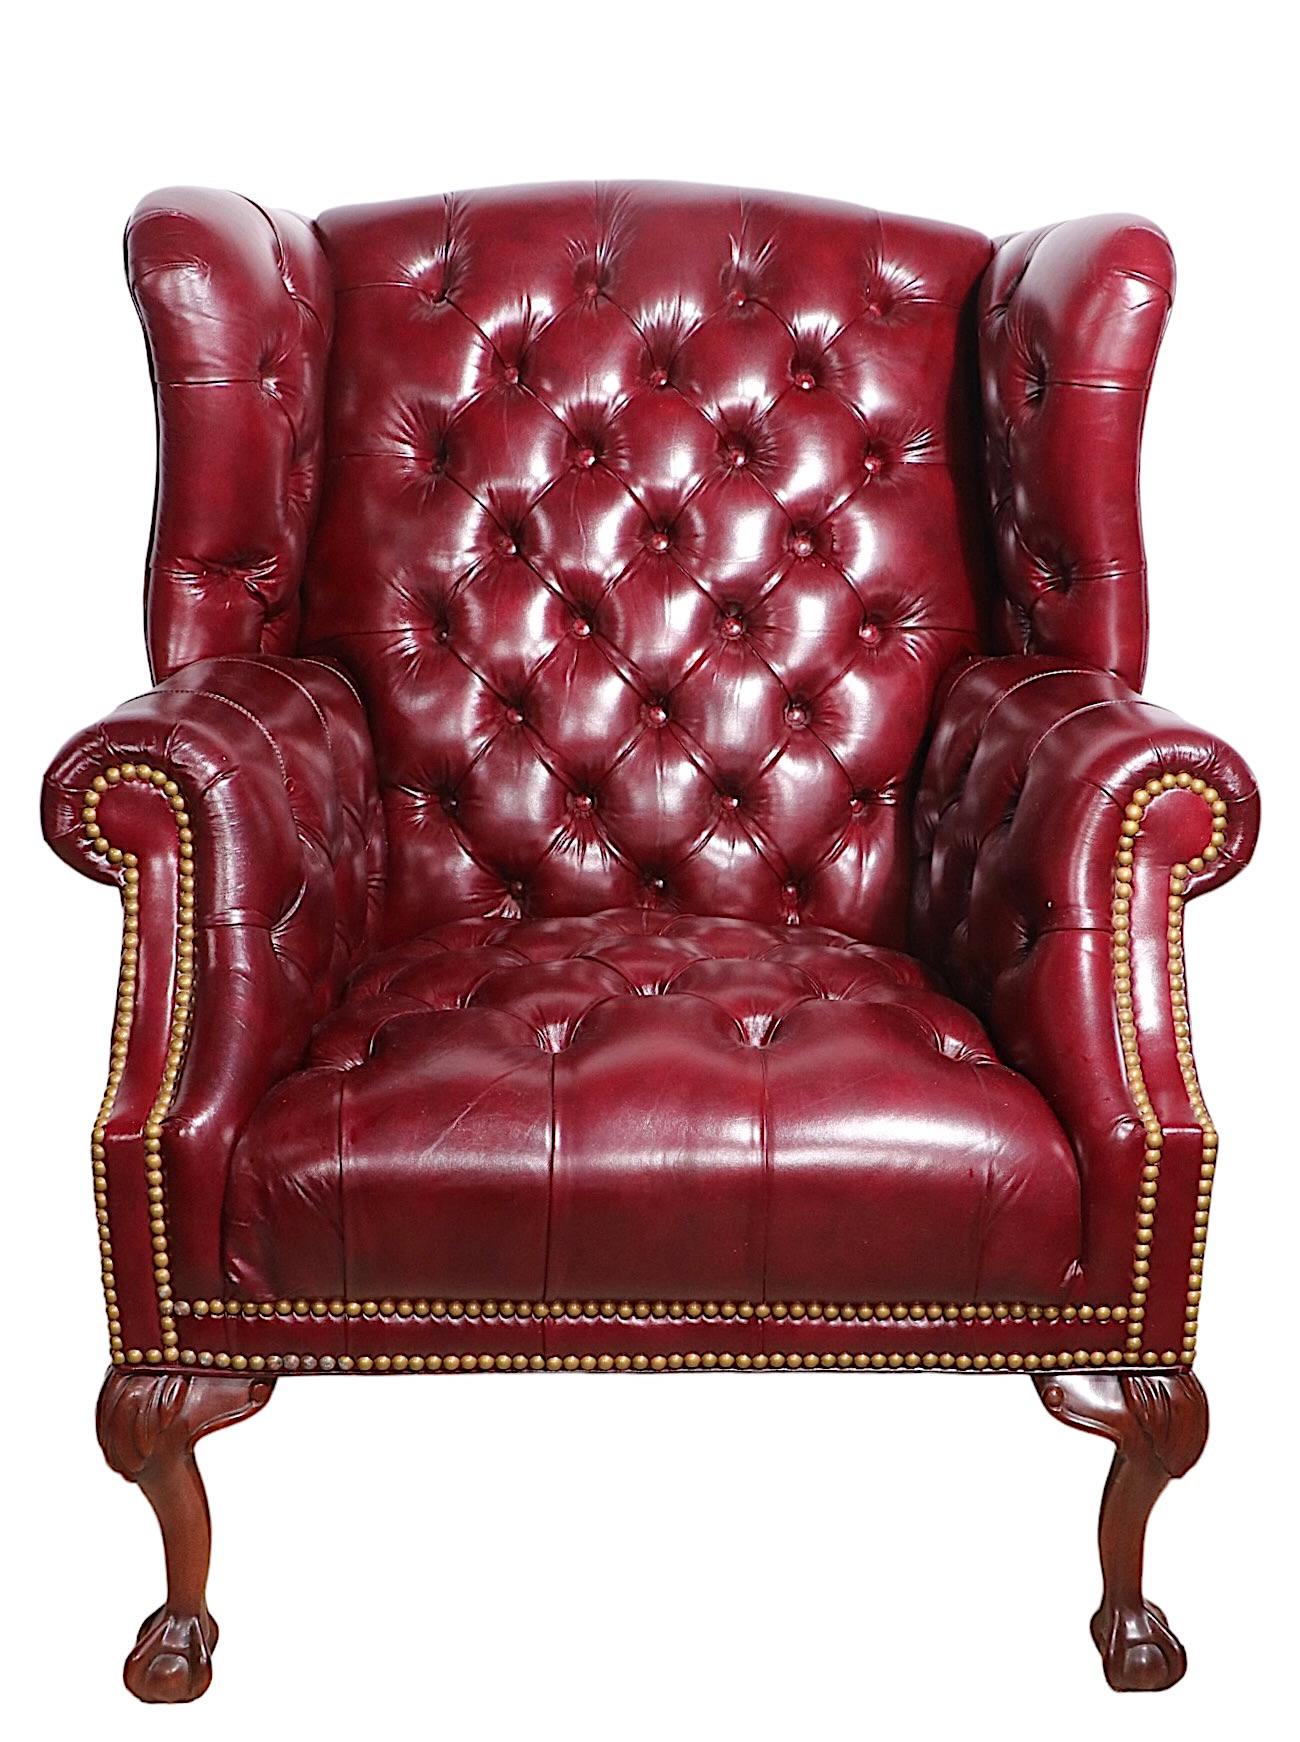 Tufted Leather Wing Chair and Ottoman by Leathercraft Inc. 9